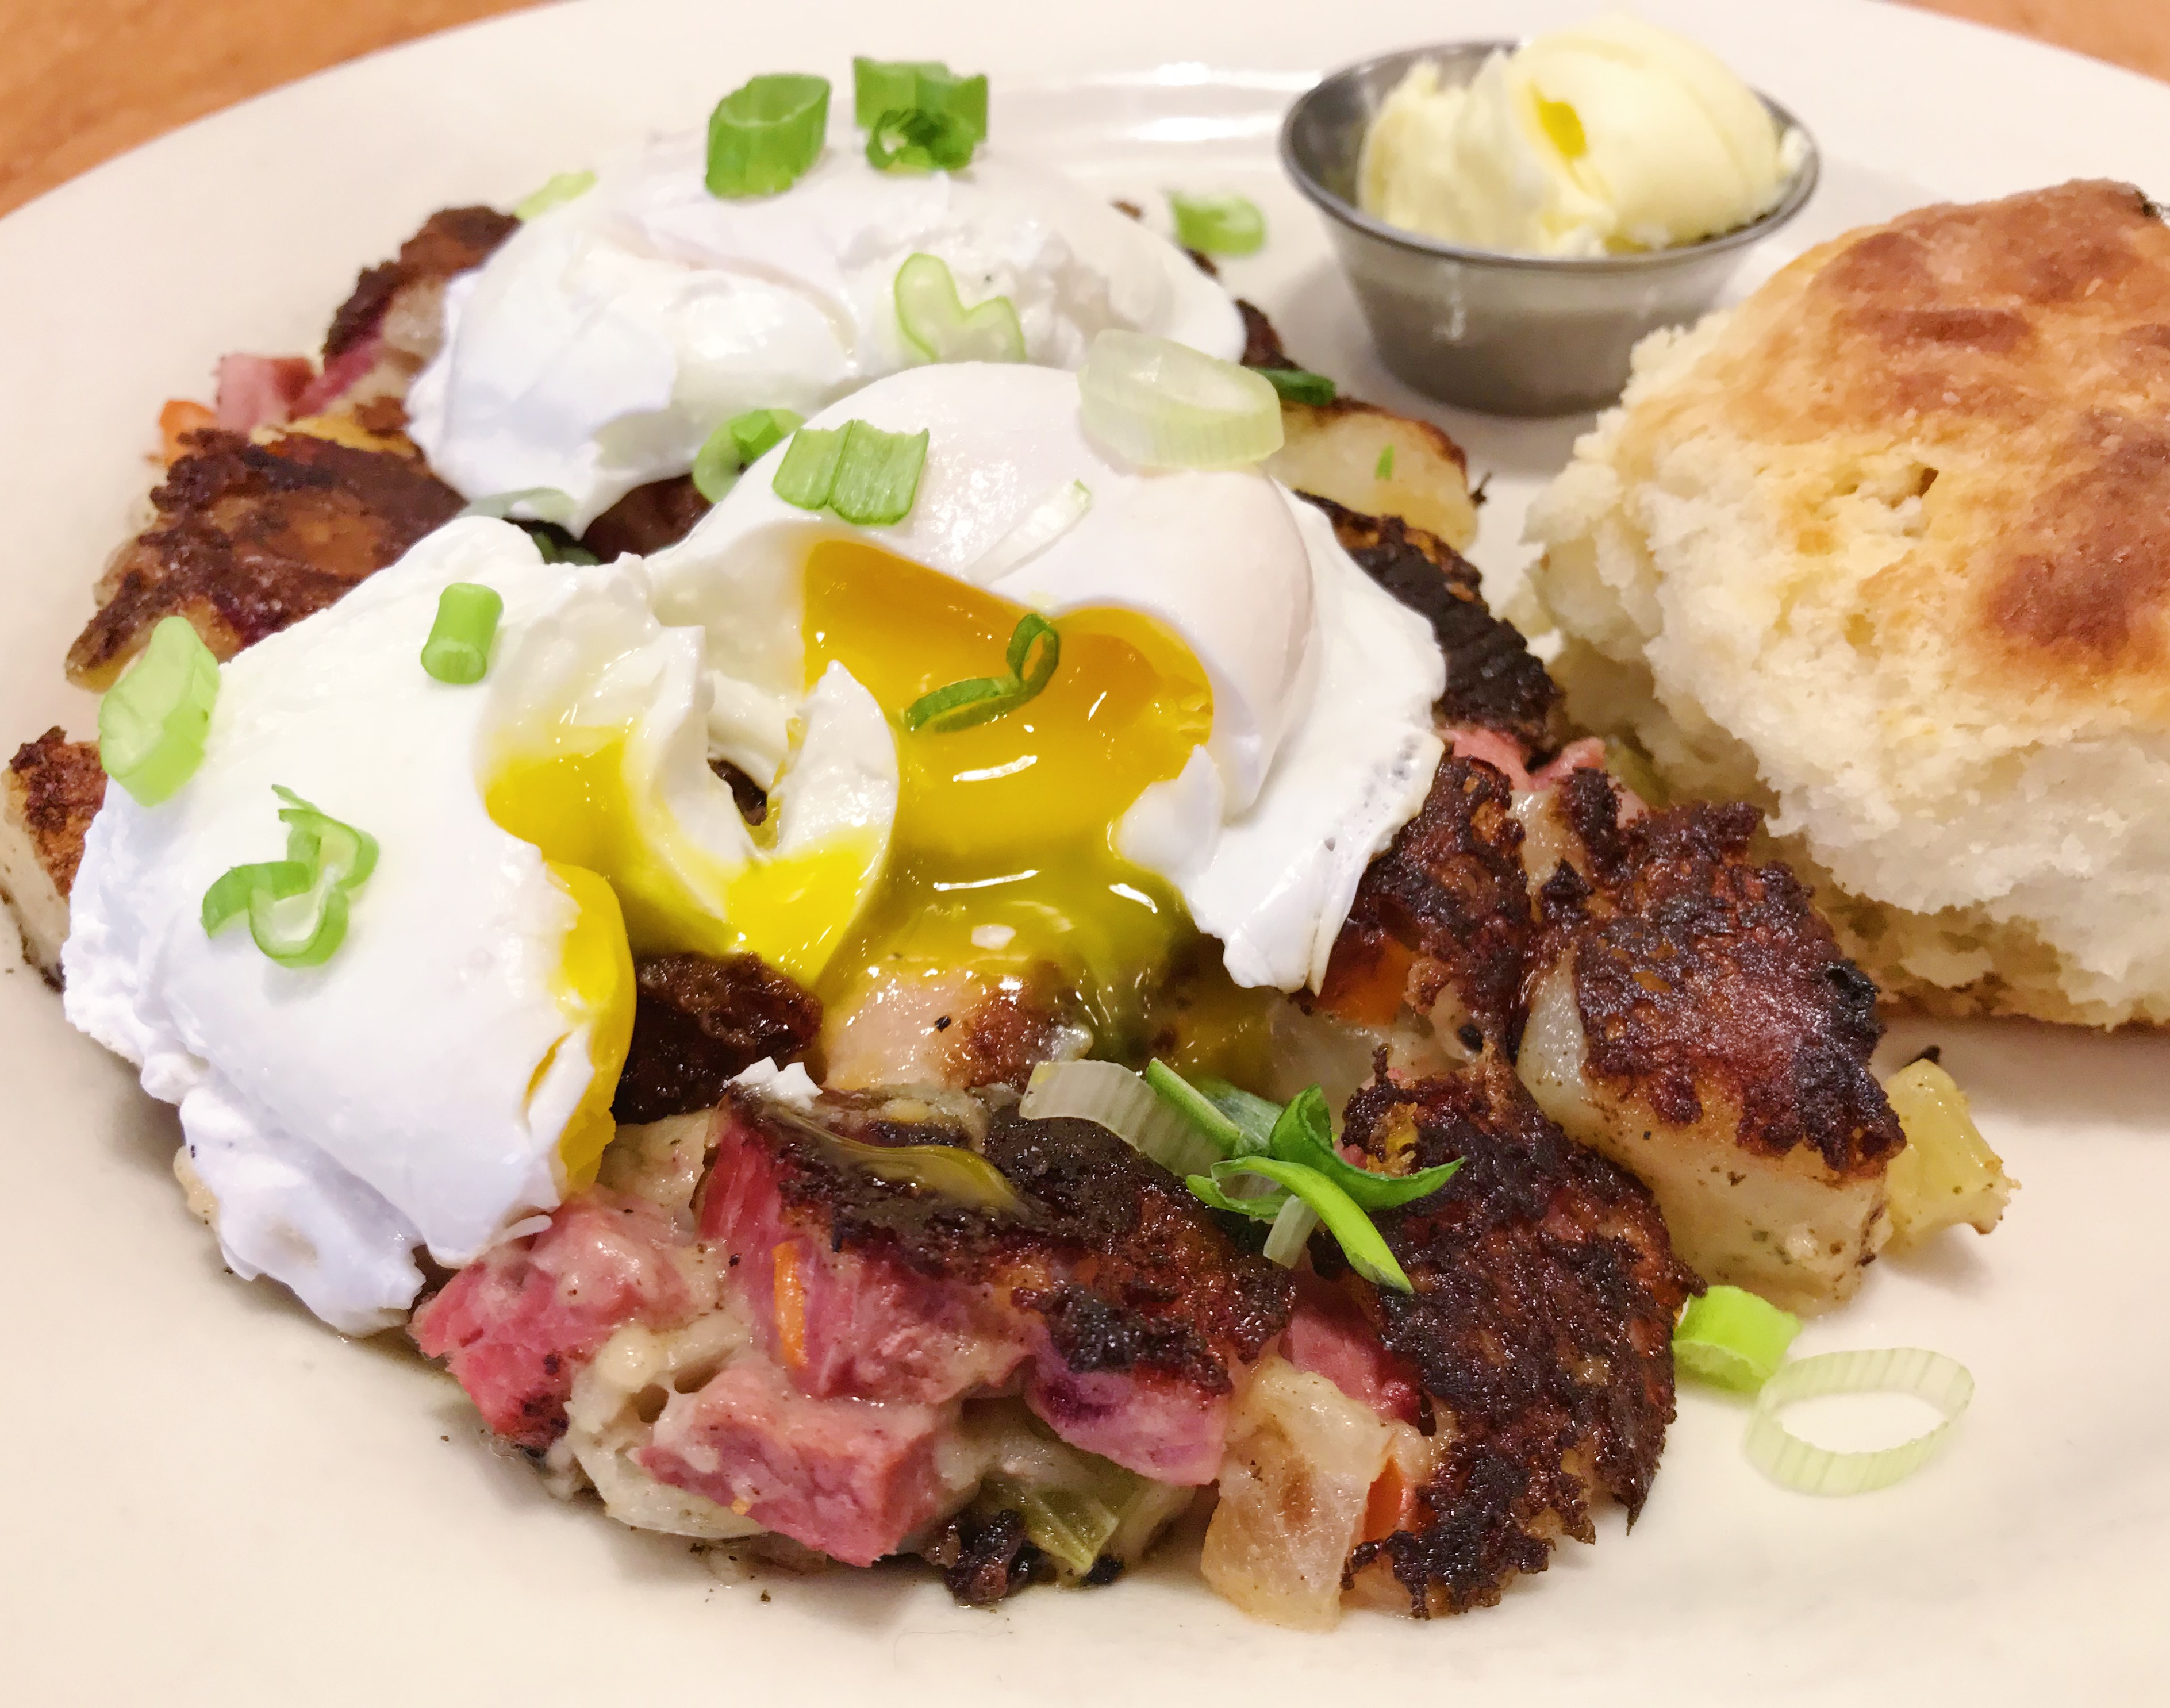 Zingerman's Roadhouse Corned Beef Hash with poached eggs.